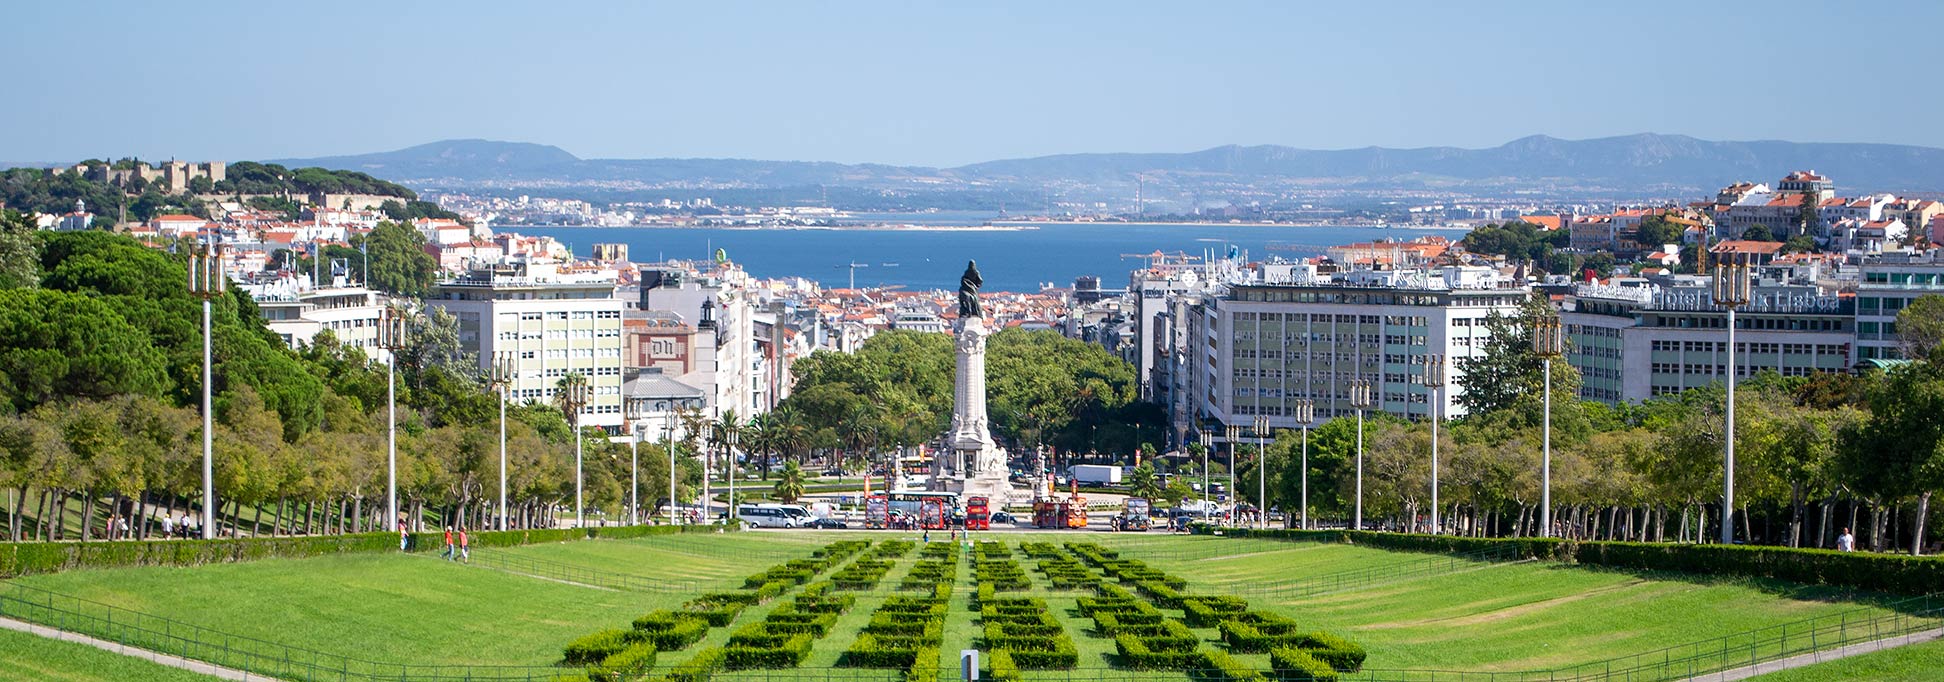 View of Lisbon from Parque Eduardo VII, with the Tagus river in the background